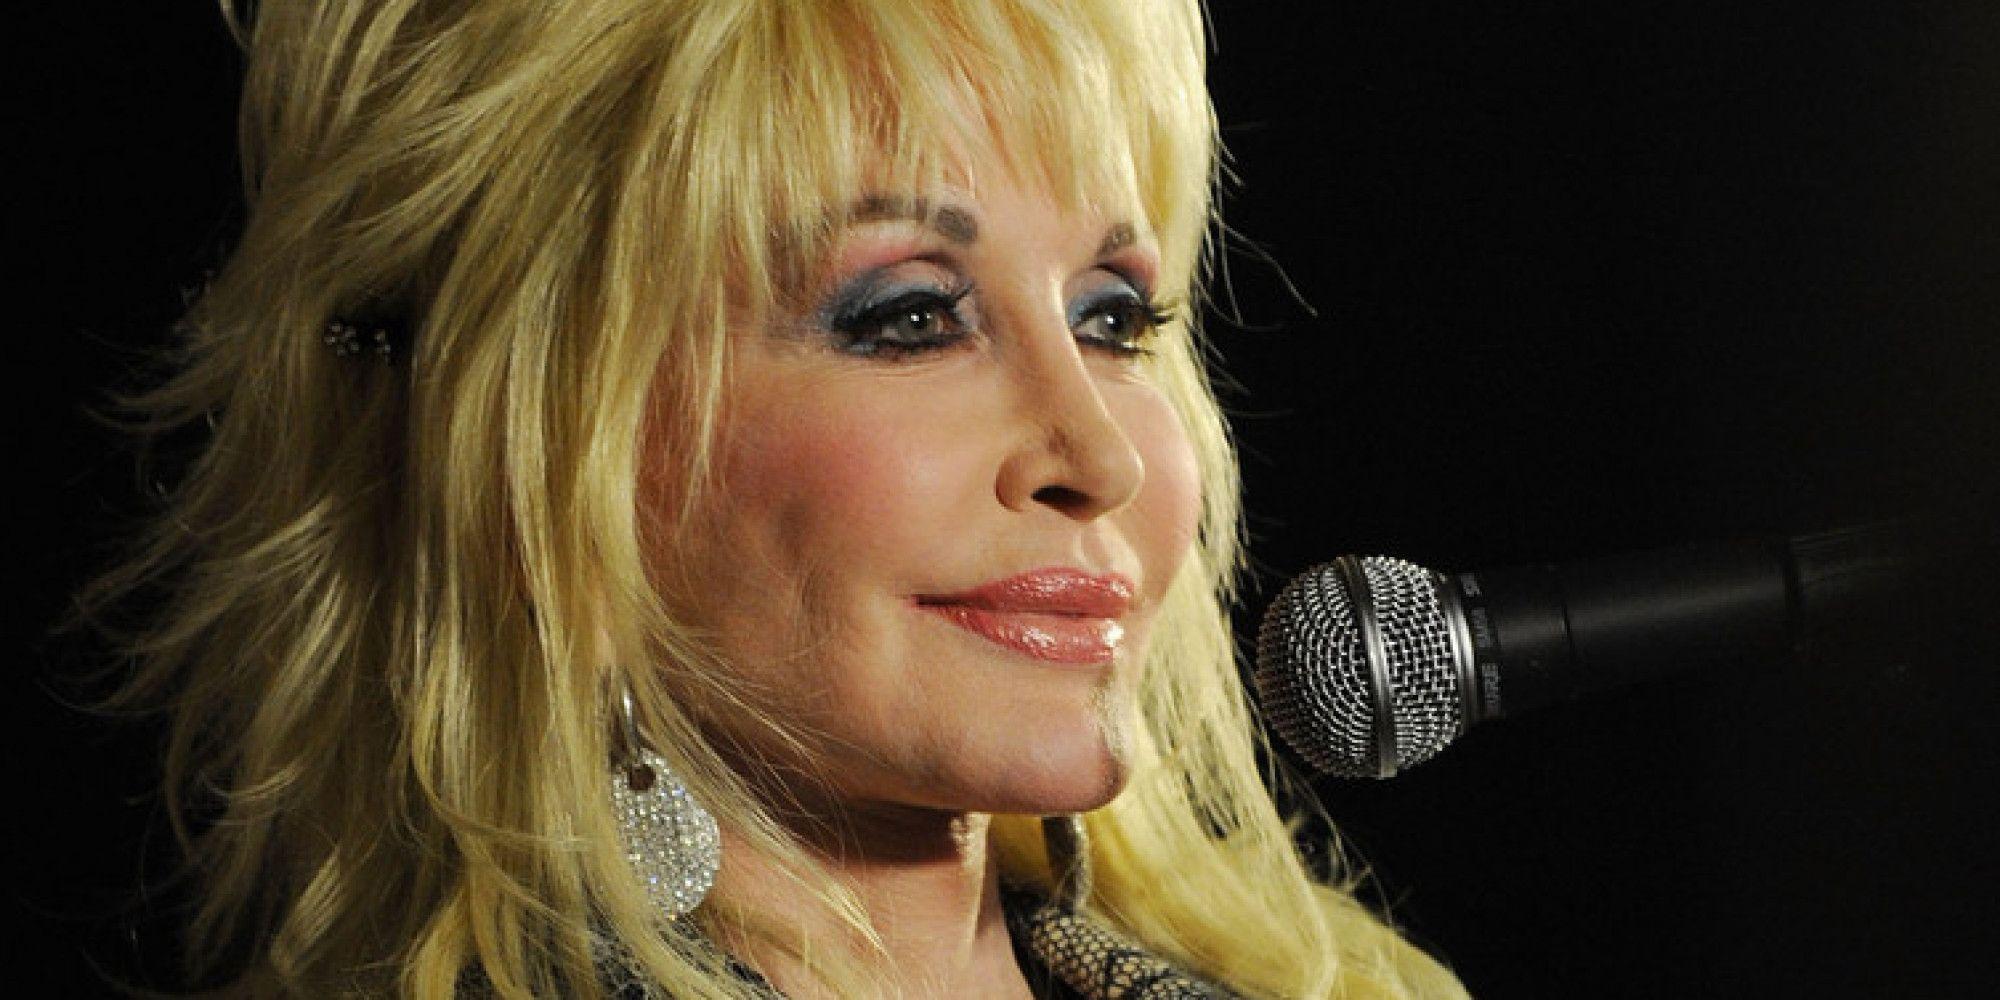 Dolly Parton Involved In Car Accident, Tweets That She's 'Resting